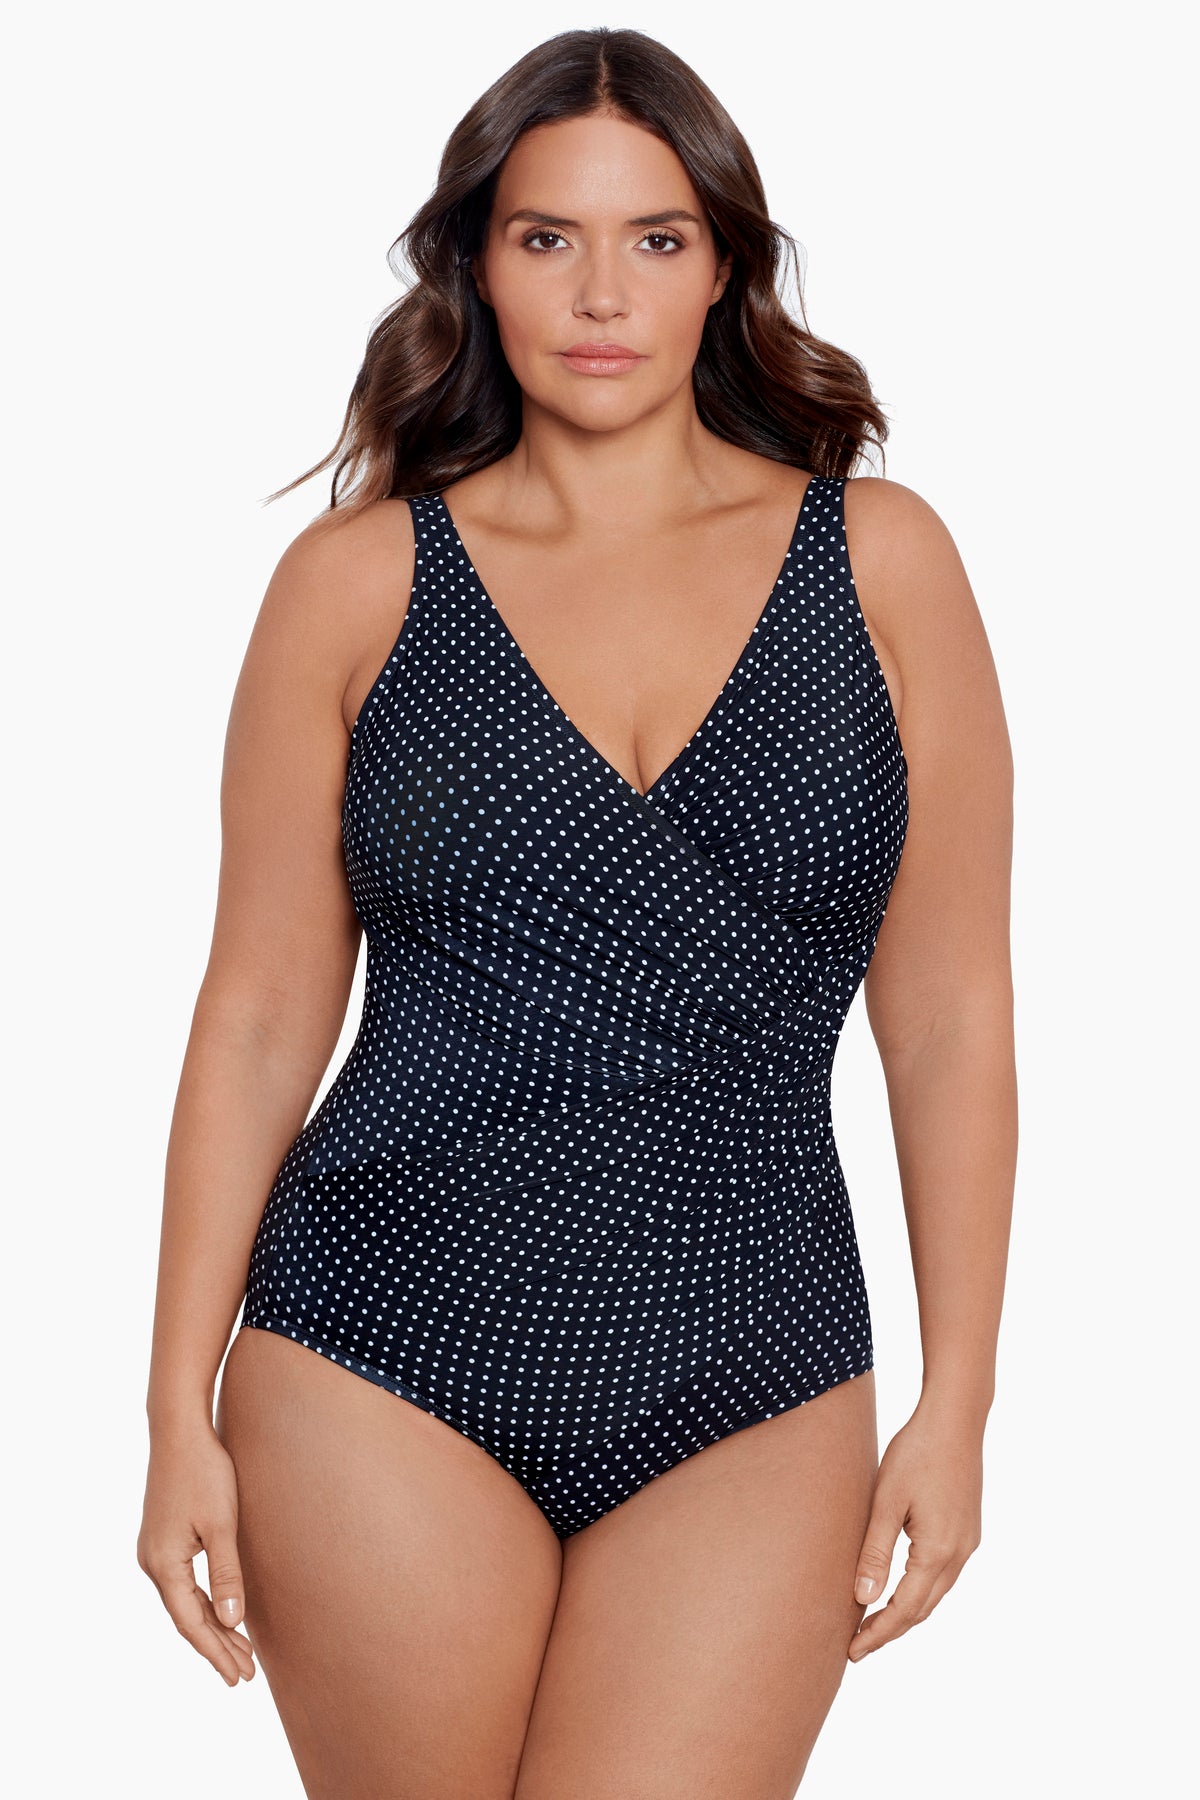 Colorblock Helix One Piece Swimsuit DDD-Cup